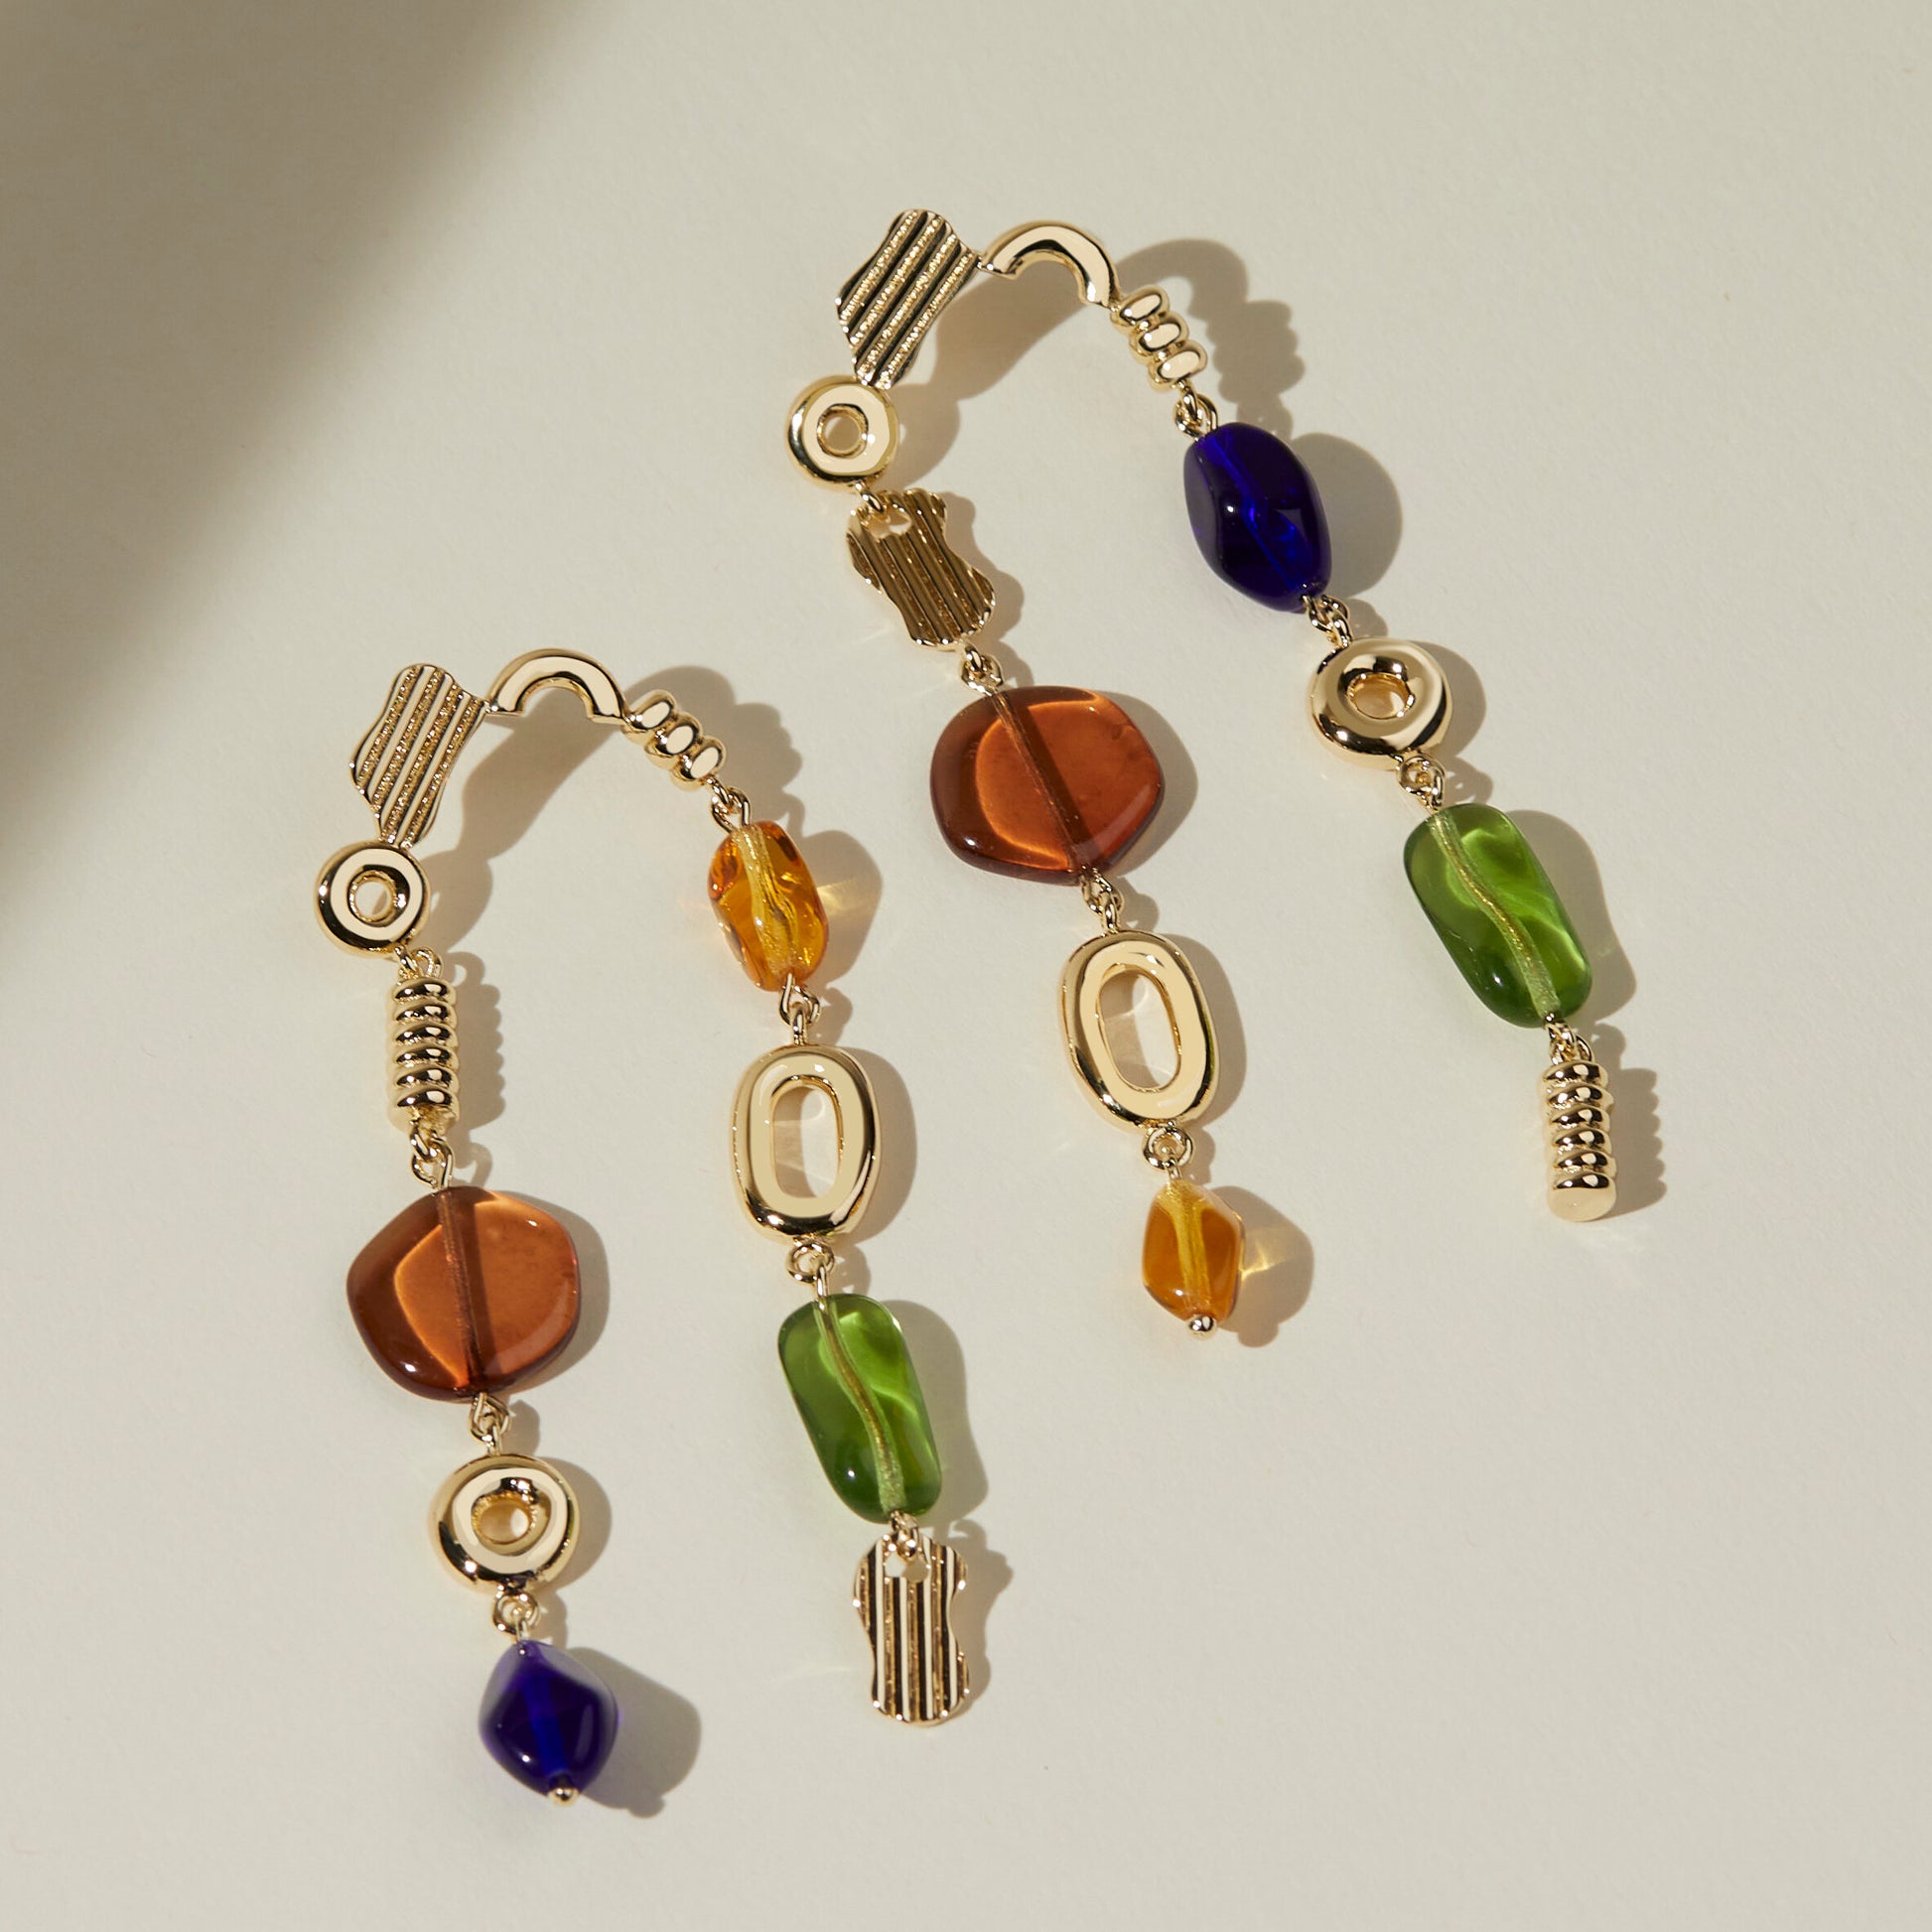 Features 8 colored glass beads that glisten in sunlight. Each metal charm is cast, polished, and assembled by hand. These stunning earrings almost dust your shoulders at 3” long. Available in two colorways. Handmade in the USA by Lindsay Lewis. avery earrings autumn rainbow